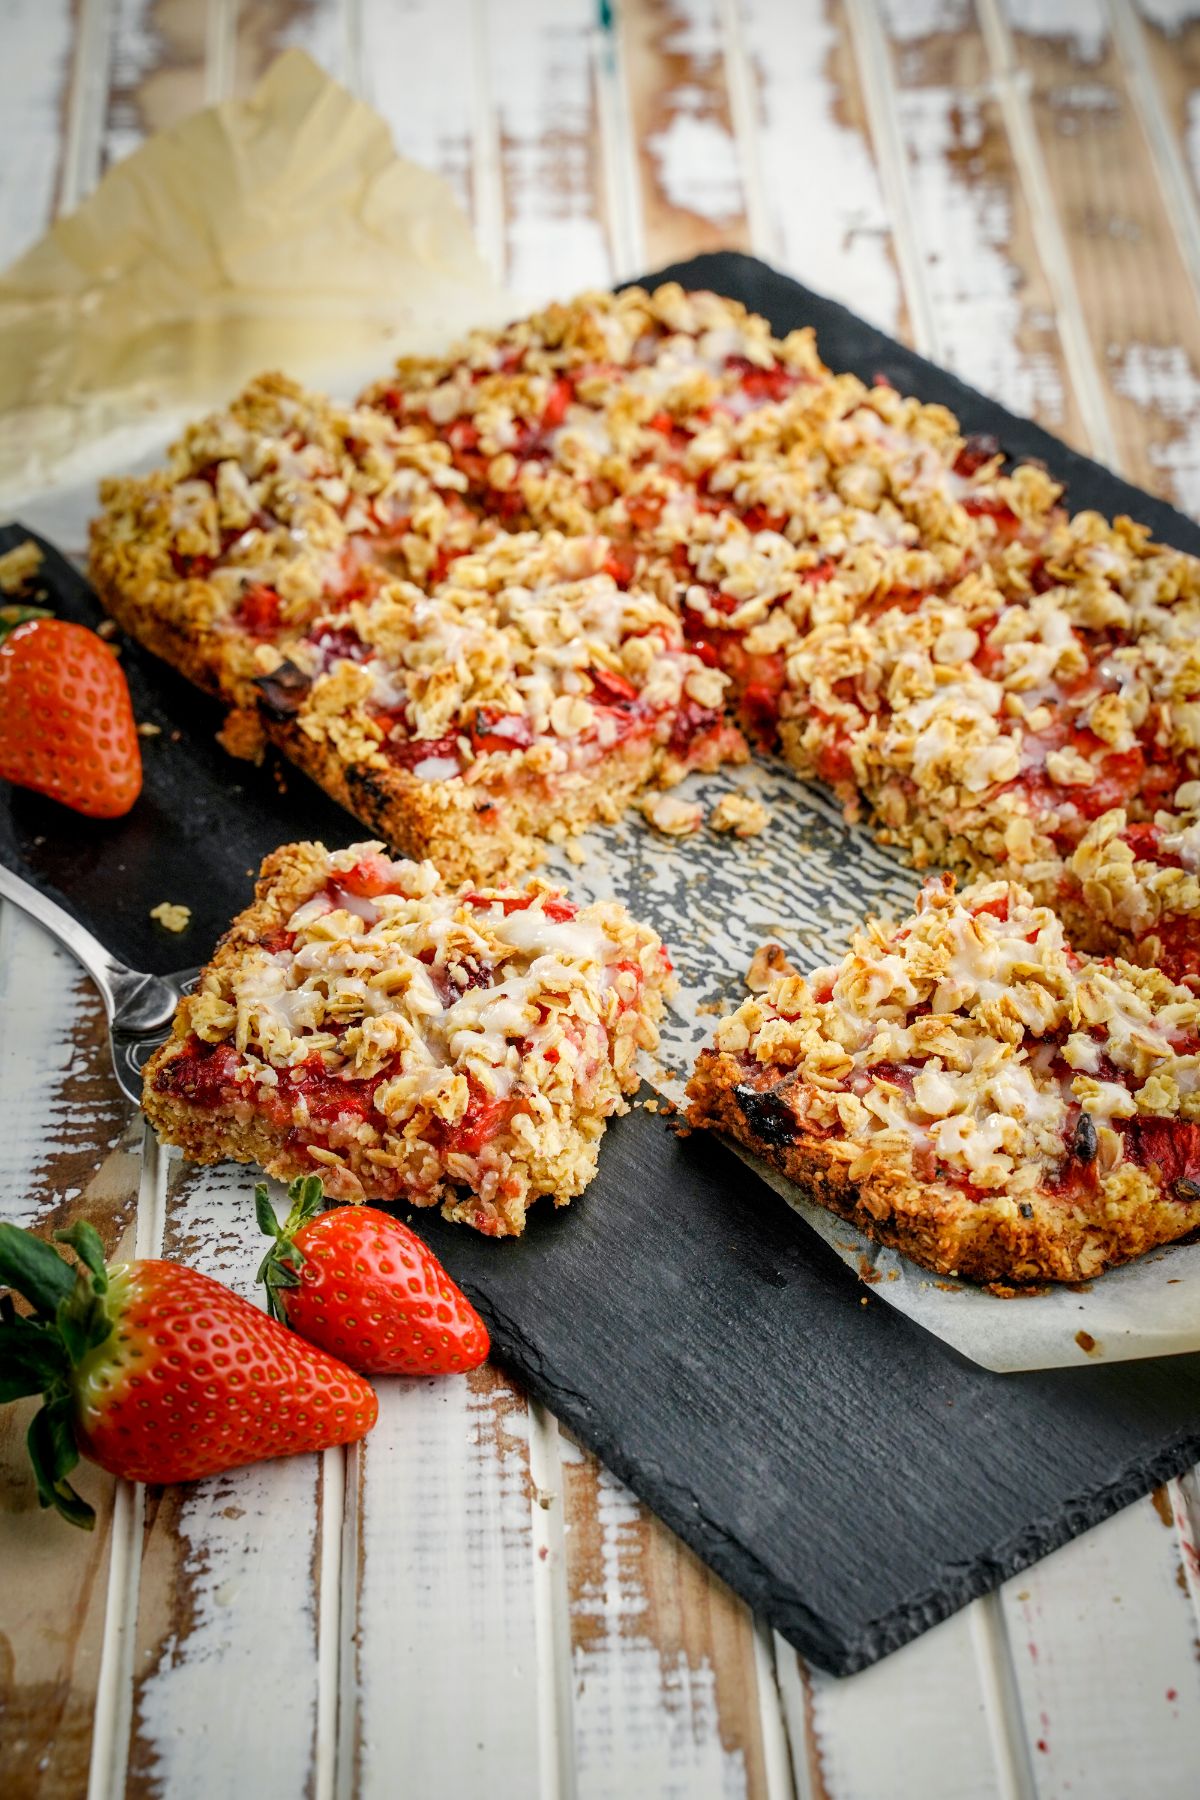 Baking tray full of healthy strawberry oatmeal bars with ripe strawberries on a table.